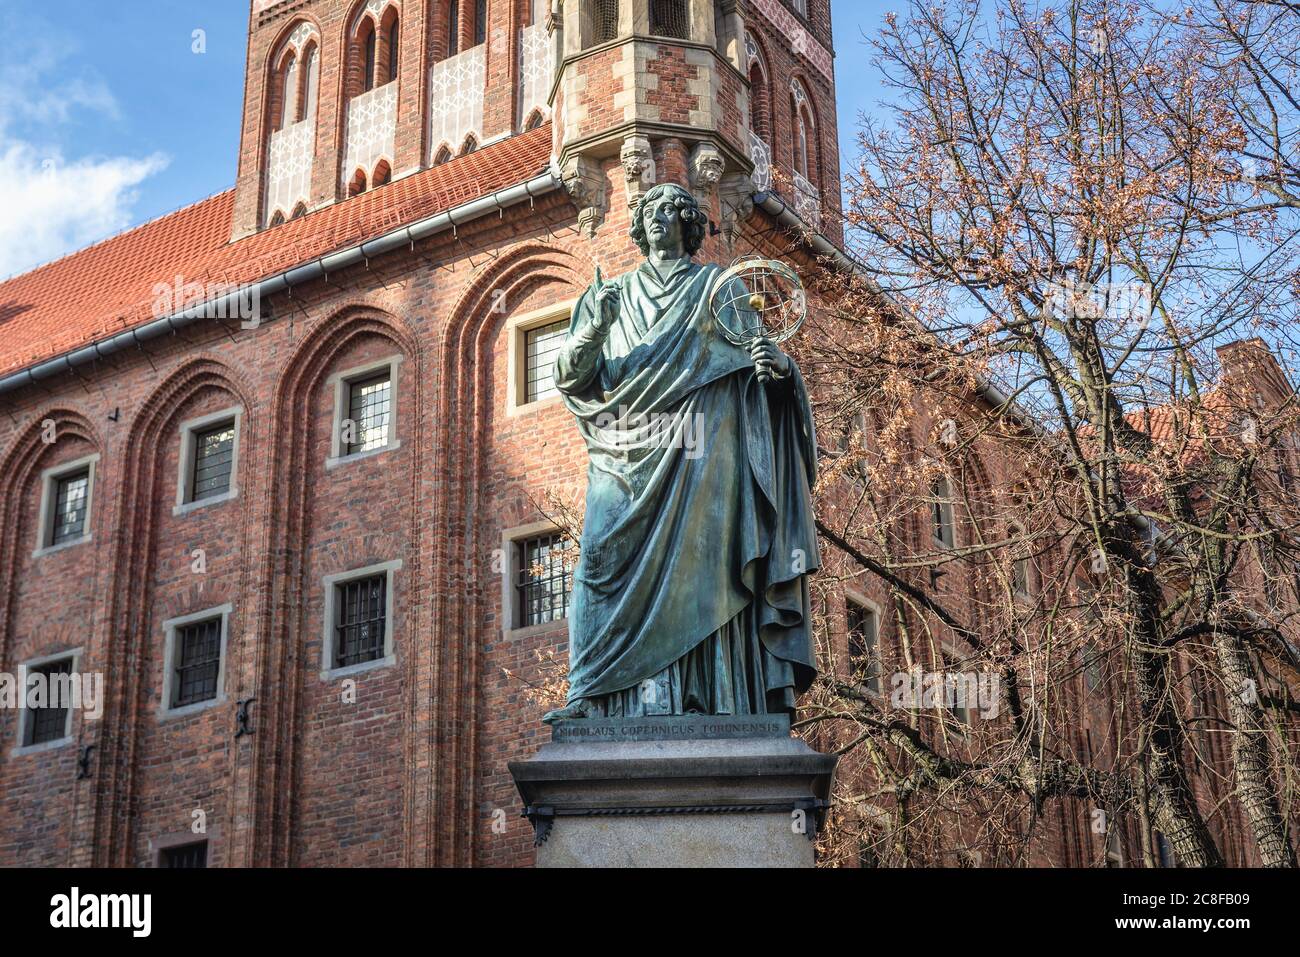 Nicolaus Copernicus monument in front of Gothic Old Town City Hall, main secular building of Torun Old Town, Kuyavian Pomeranian Voivodeship, Poland Stock Photo